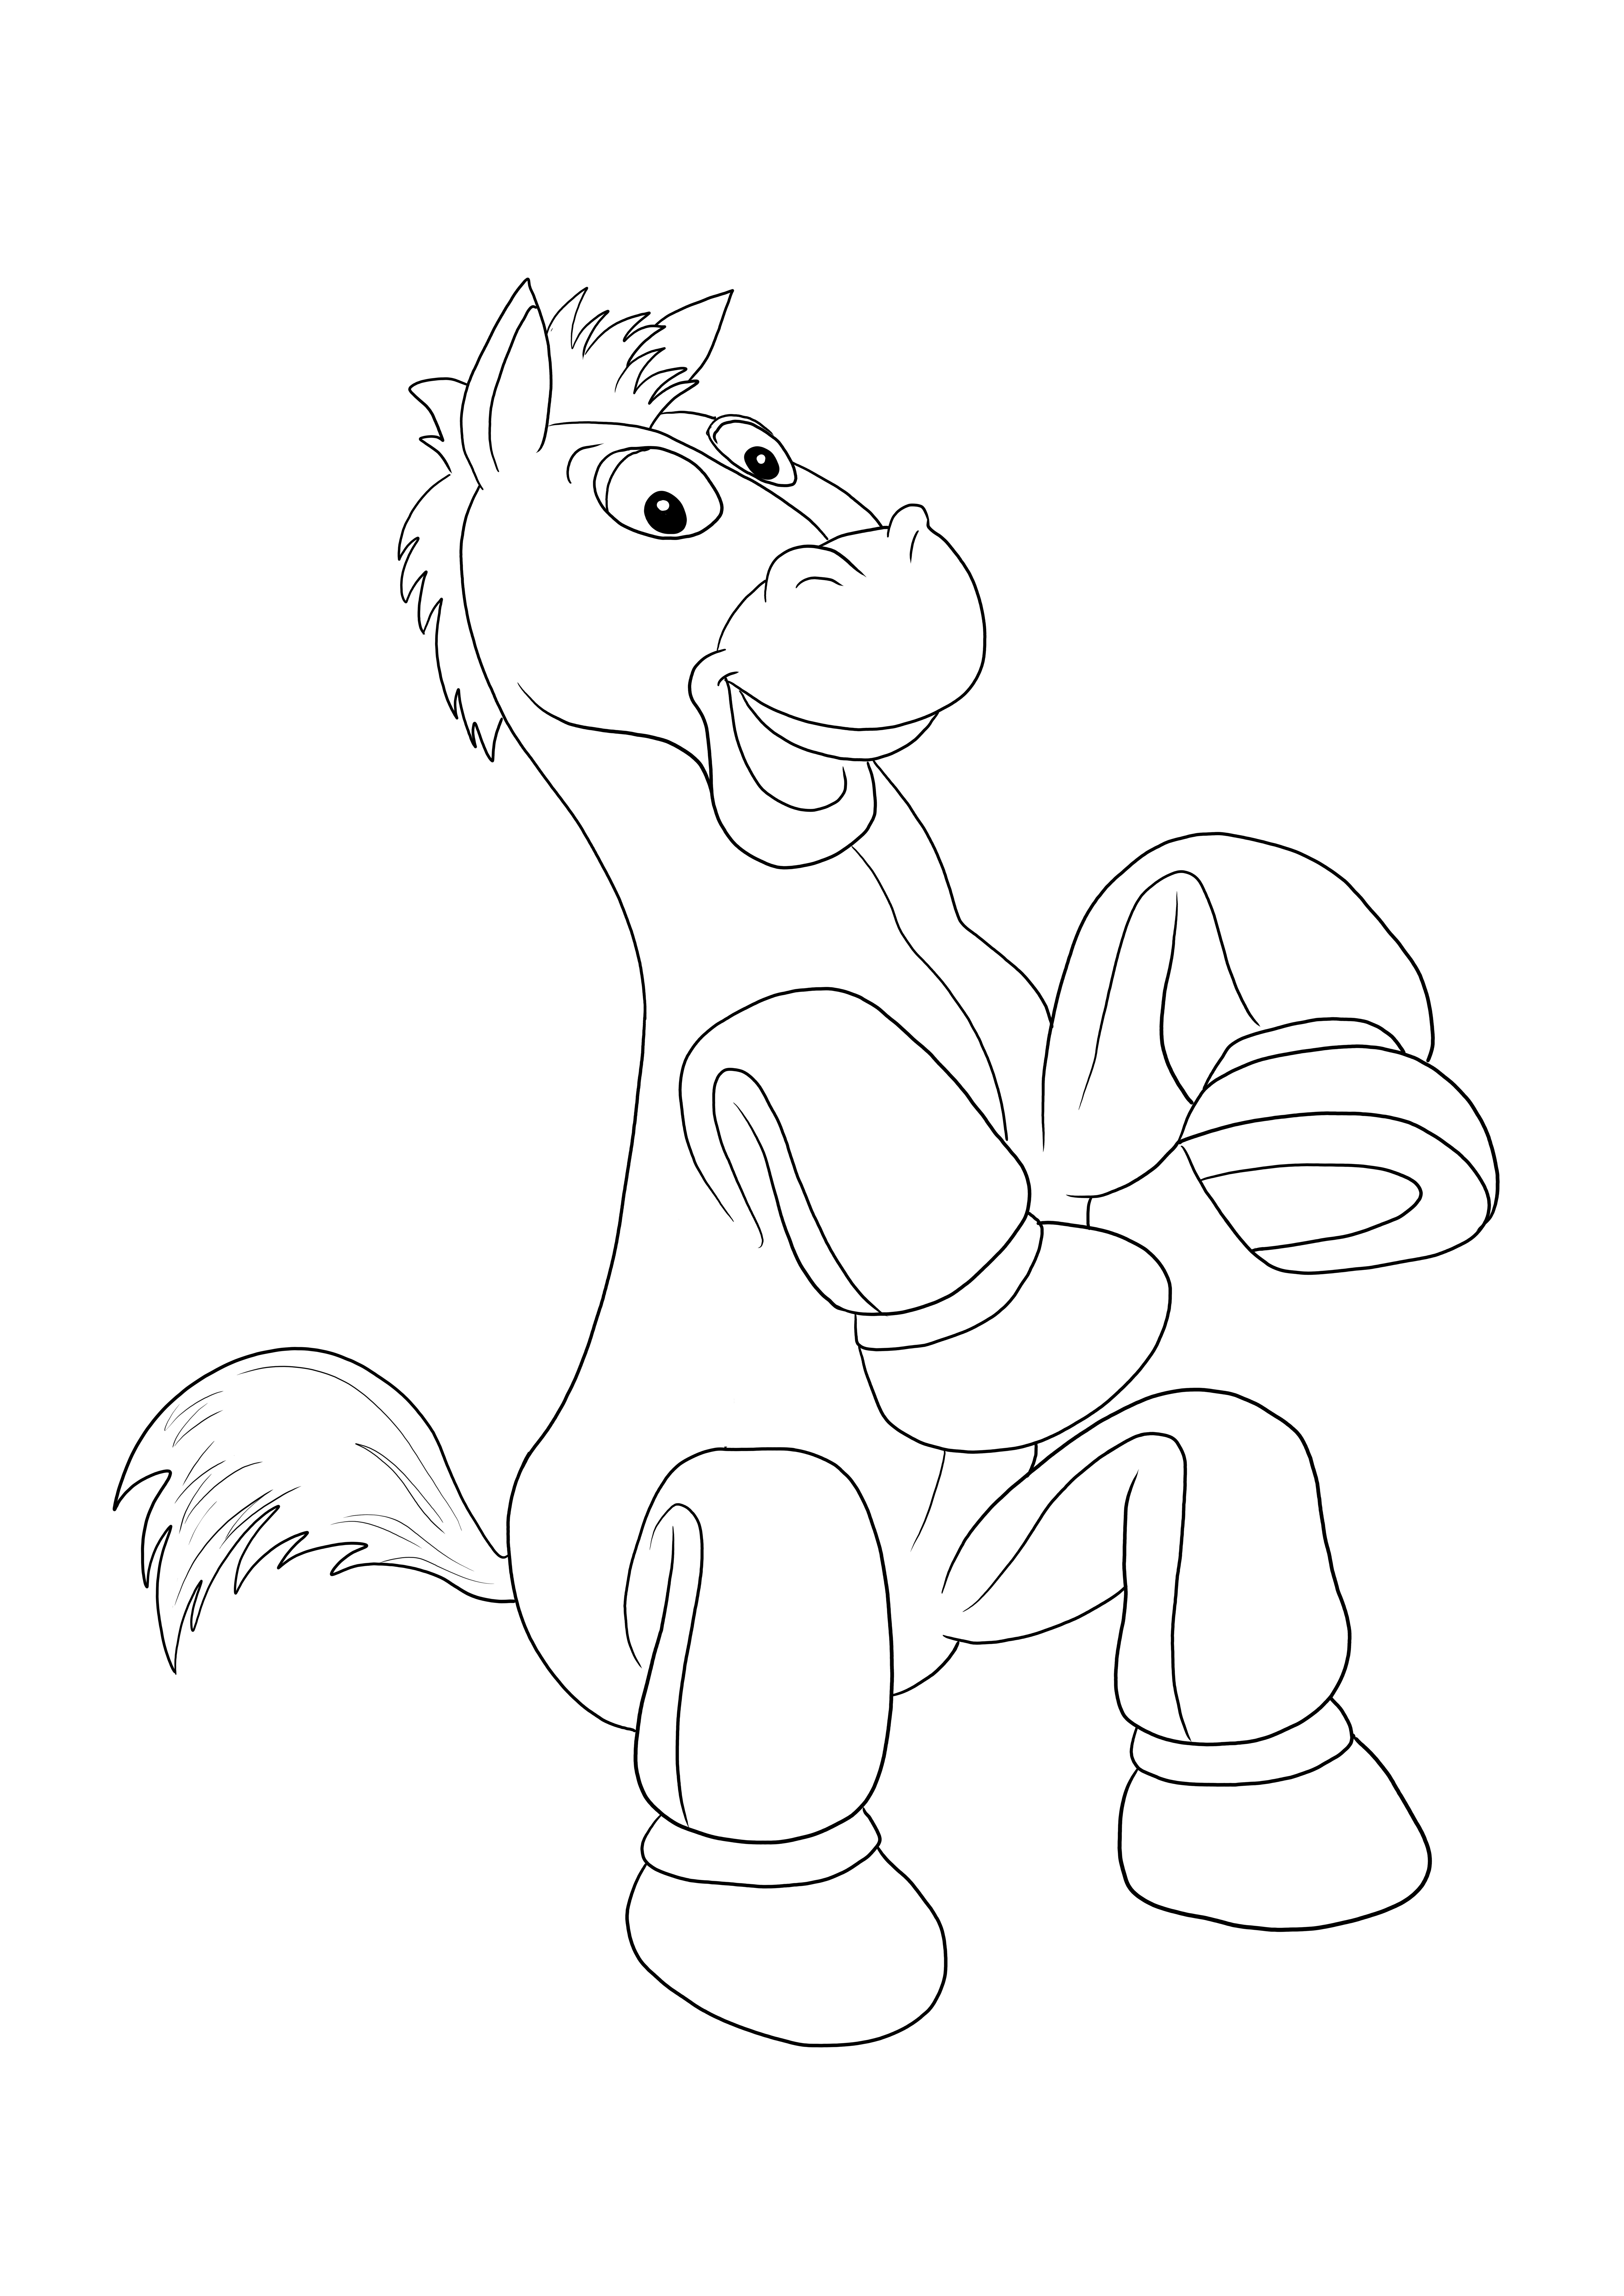 Happy Bullseye horse jumping and neighing free printable to color